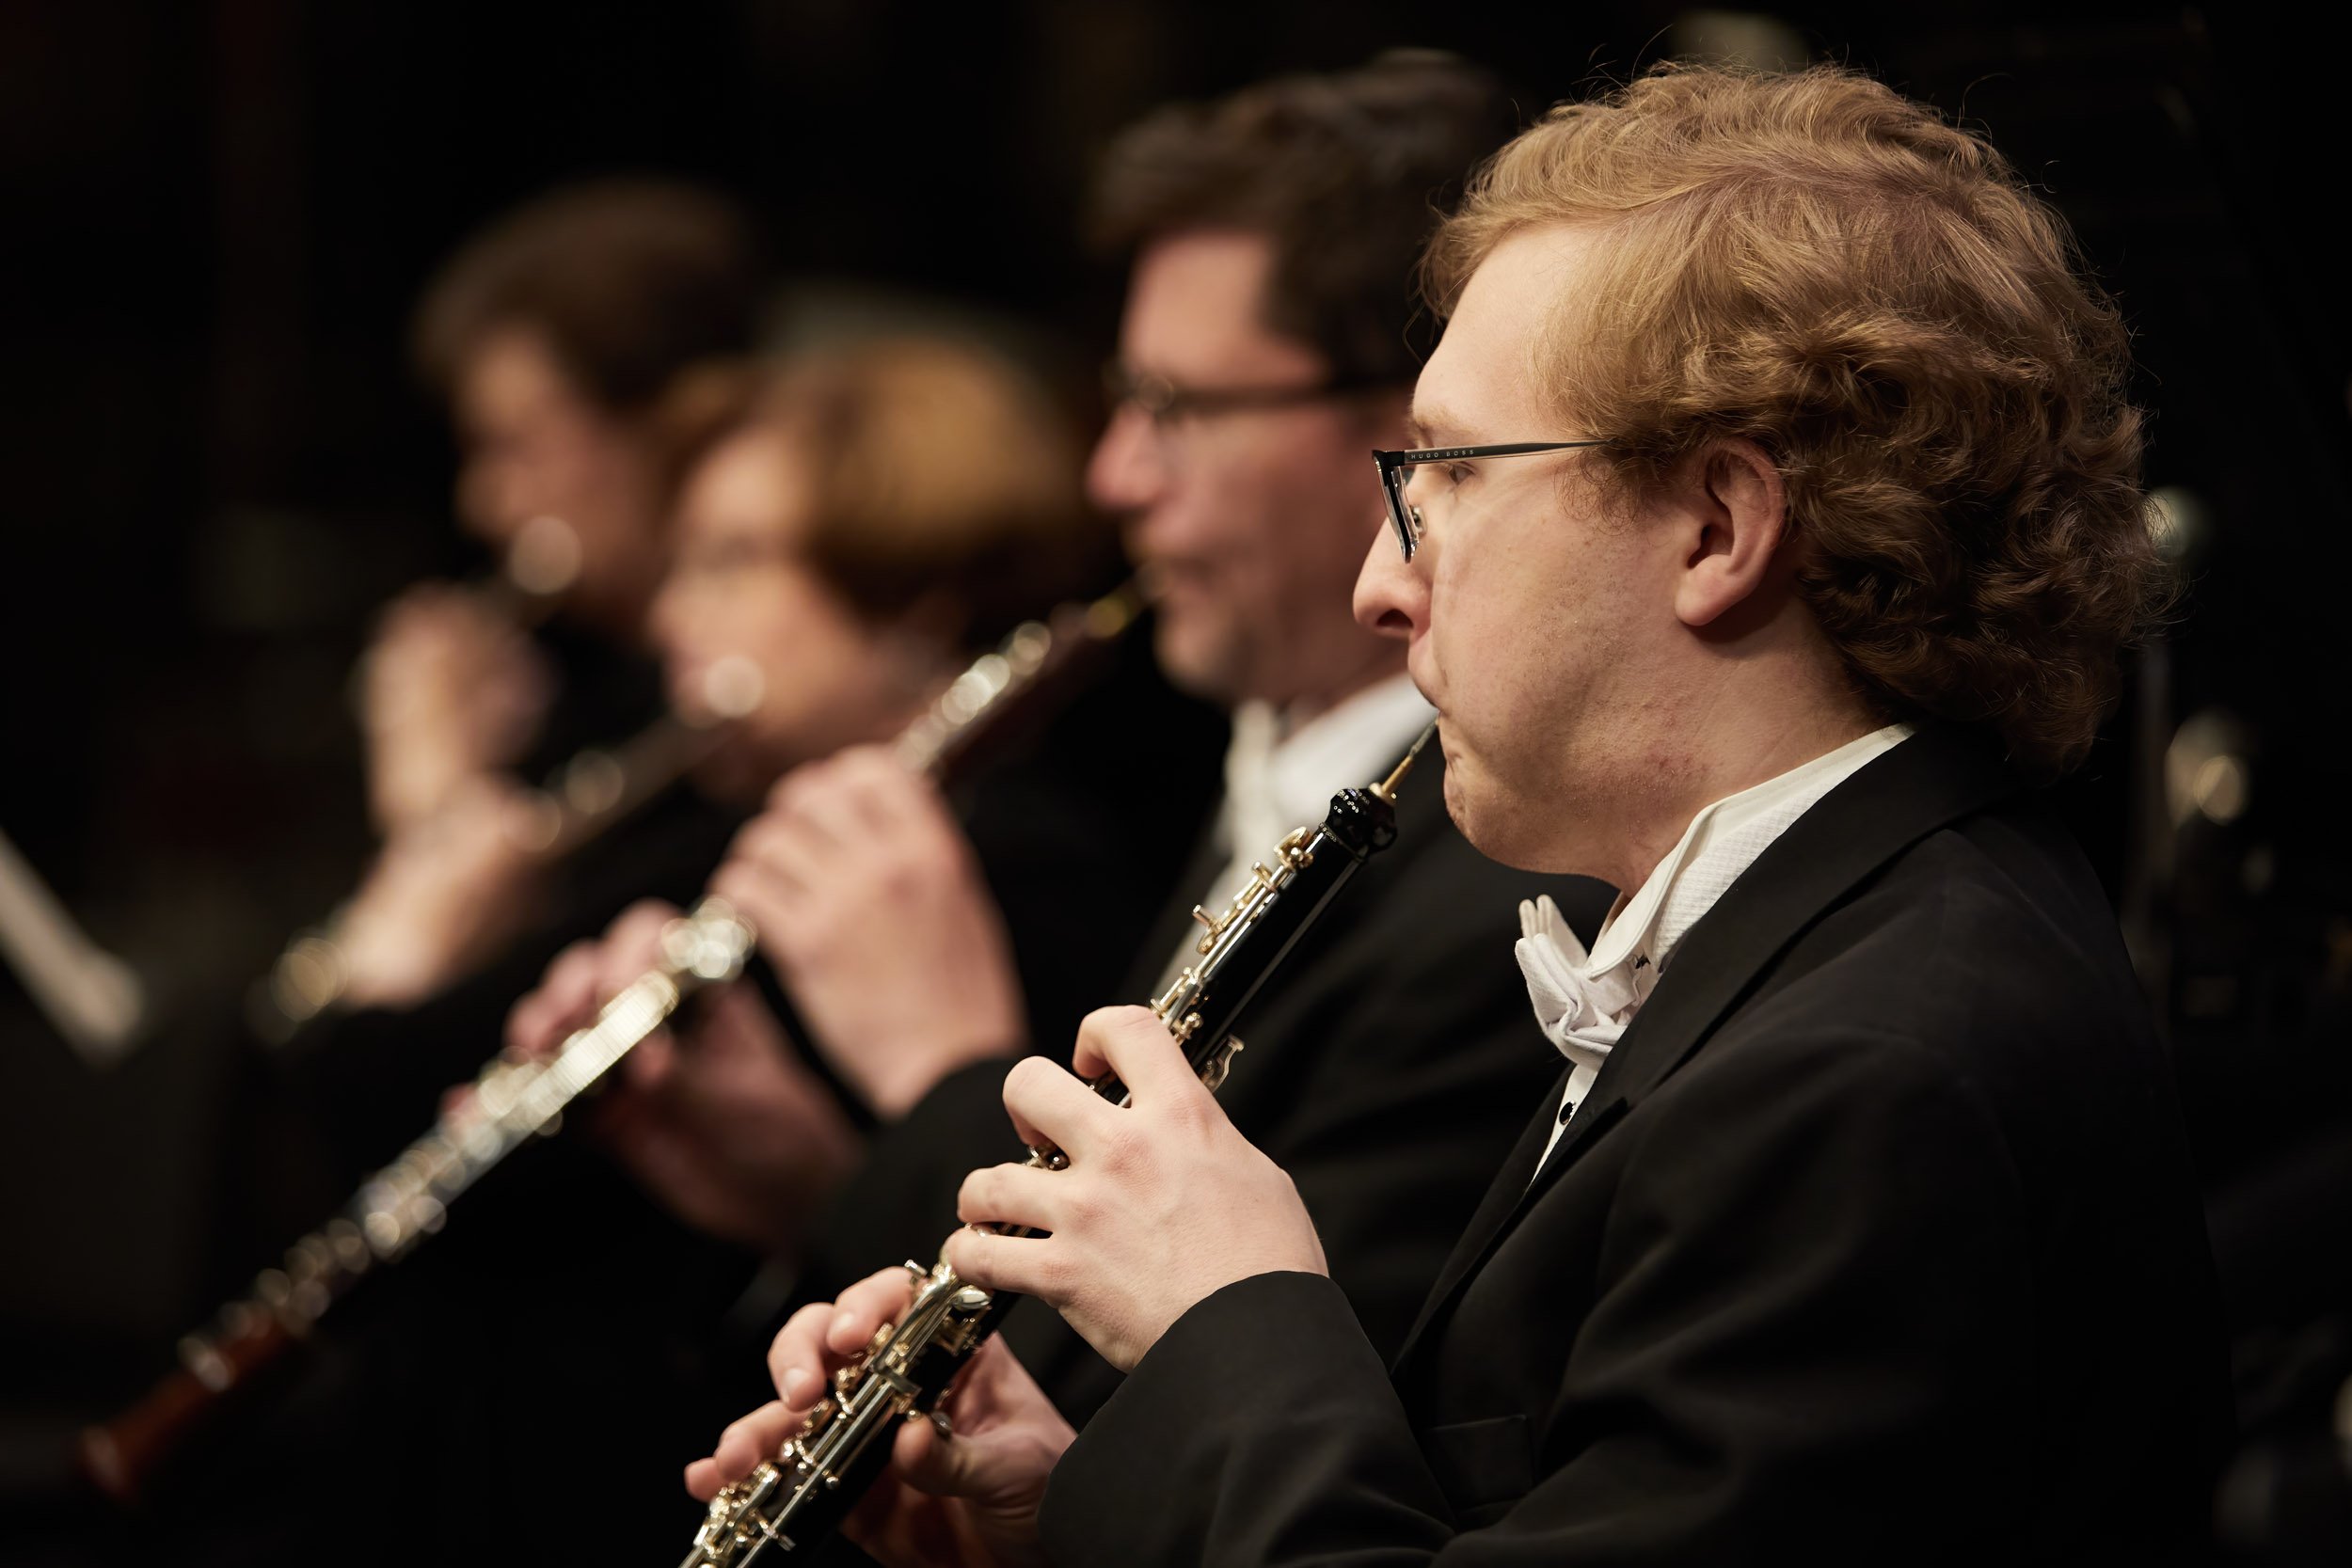  Oboists in performance of Beethoven Symphony No. 7 with the Central Oregon Symphony in Bend, Oregon. 